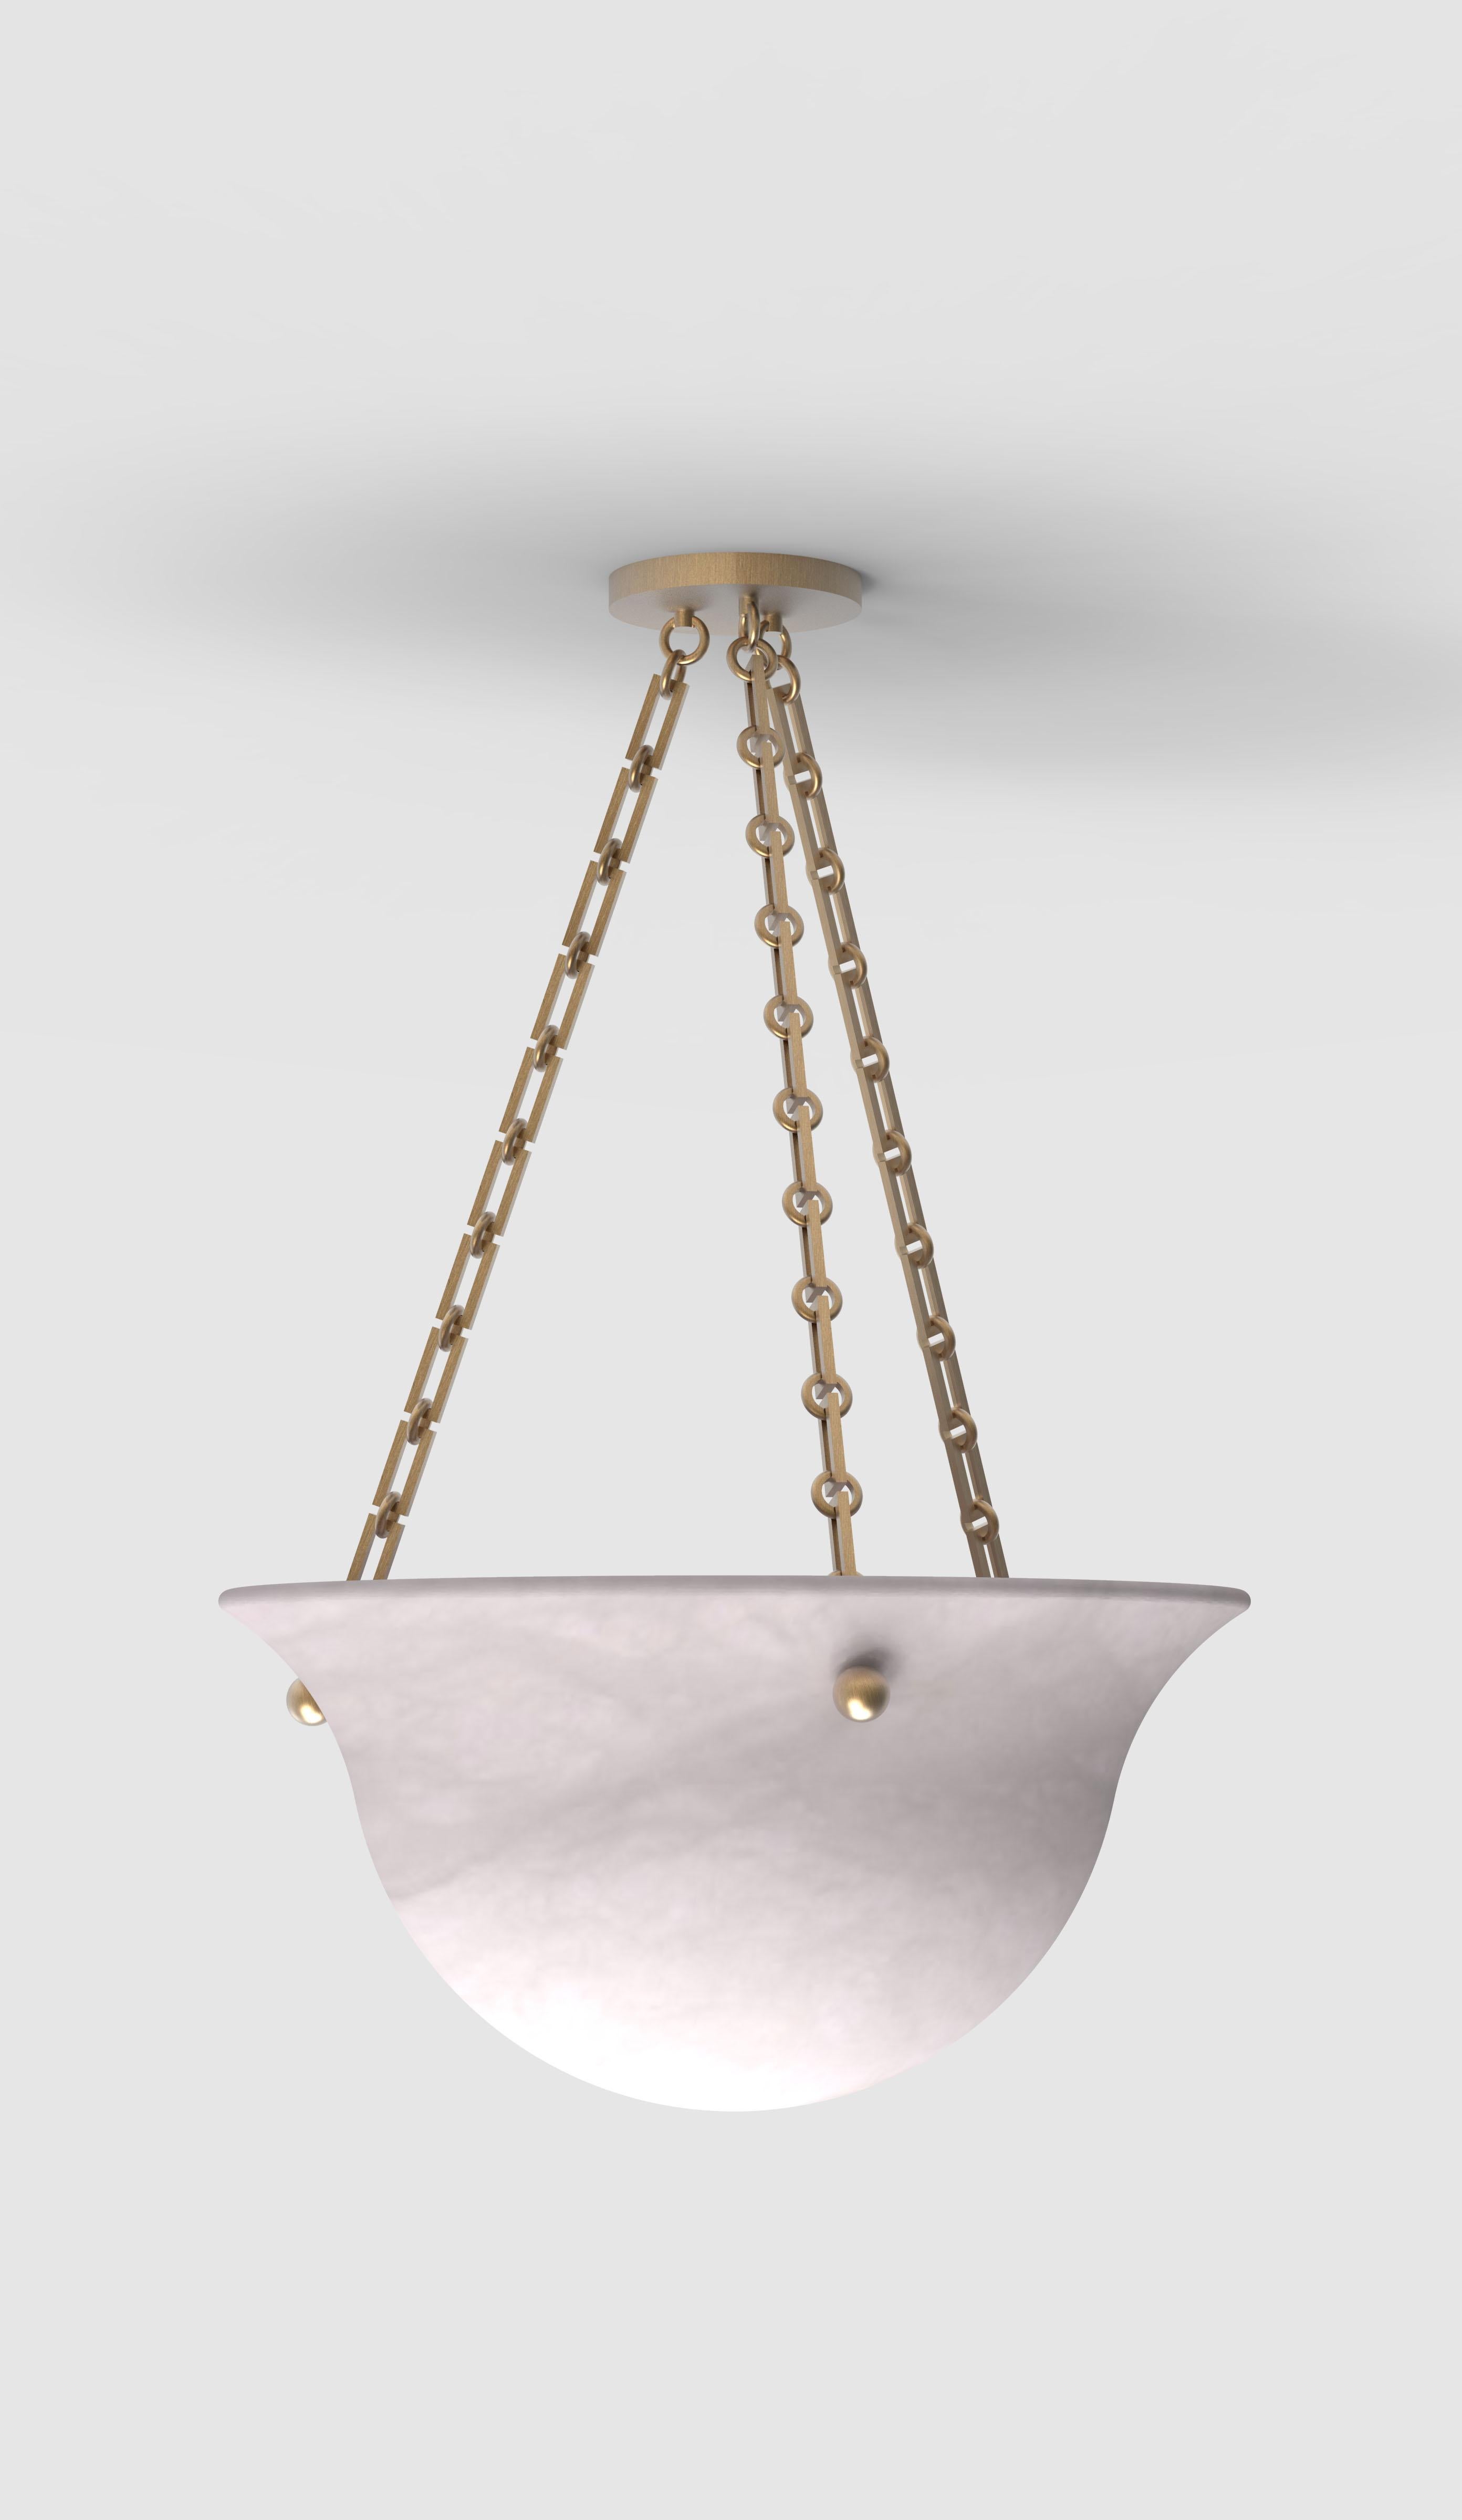 Orphan work 201A Chandelier BB
Shown in alabaster with brushed brass
Available in brushed brass and blackened brass
Bowl measures: 24” diameter x 12” height
Chain height to order
UL approved
Must use LED bulb 

Orphan Work is designed to complement